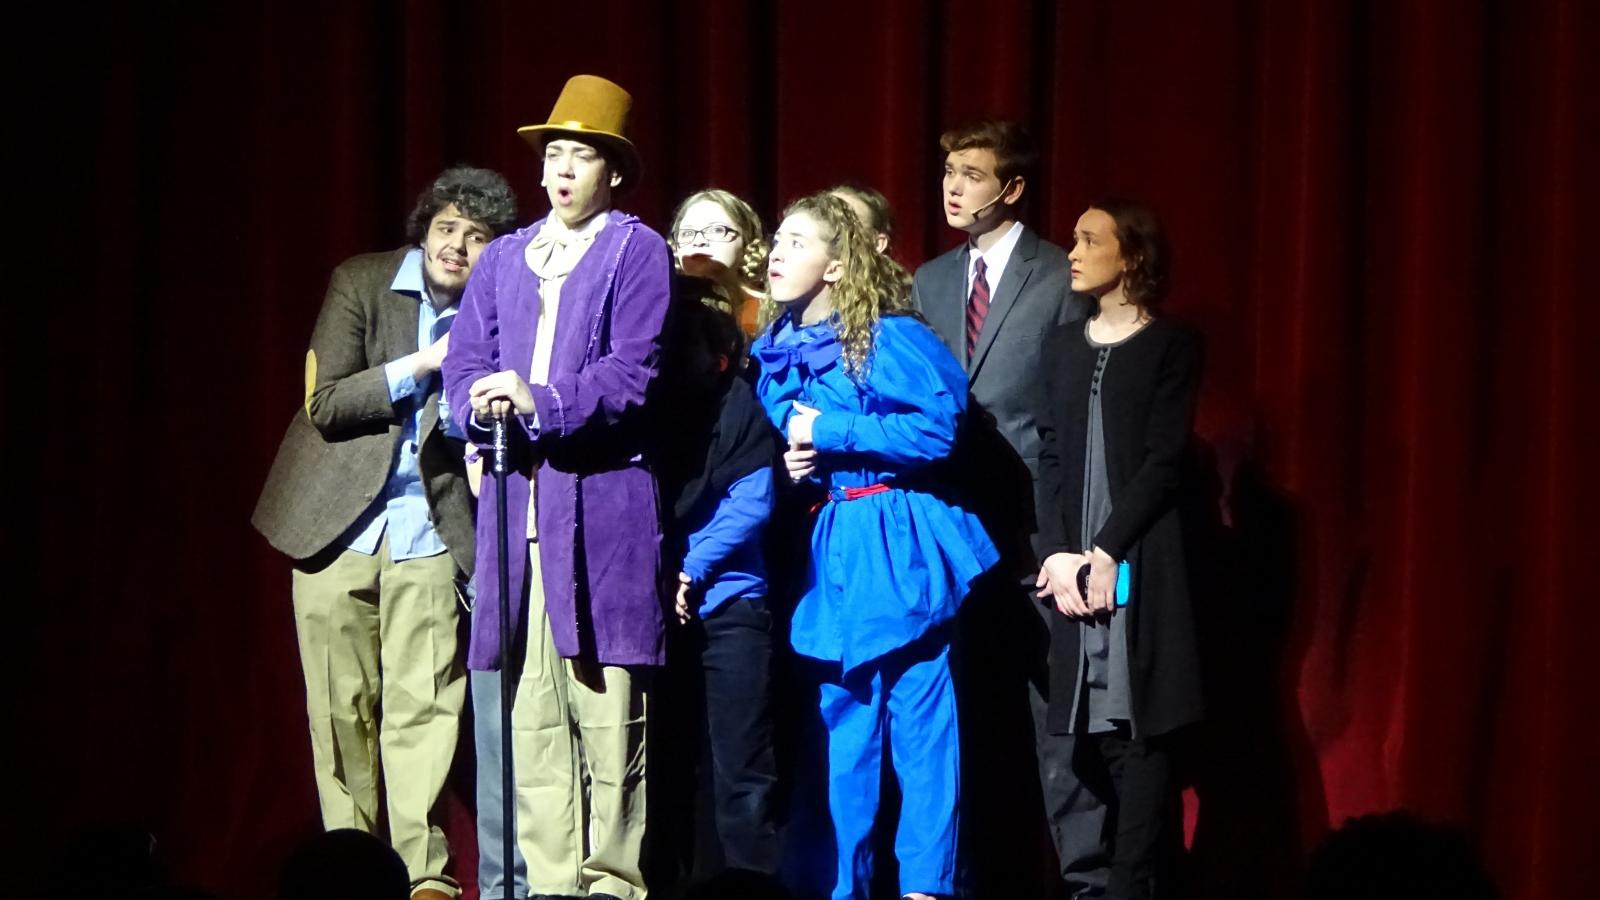 Willy Wonka cast onstage during the performance